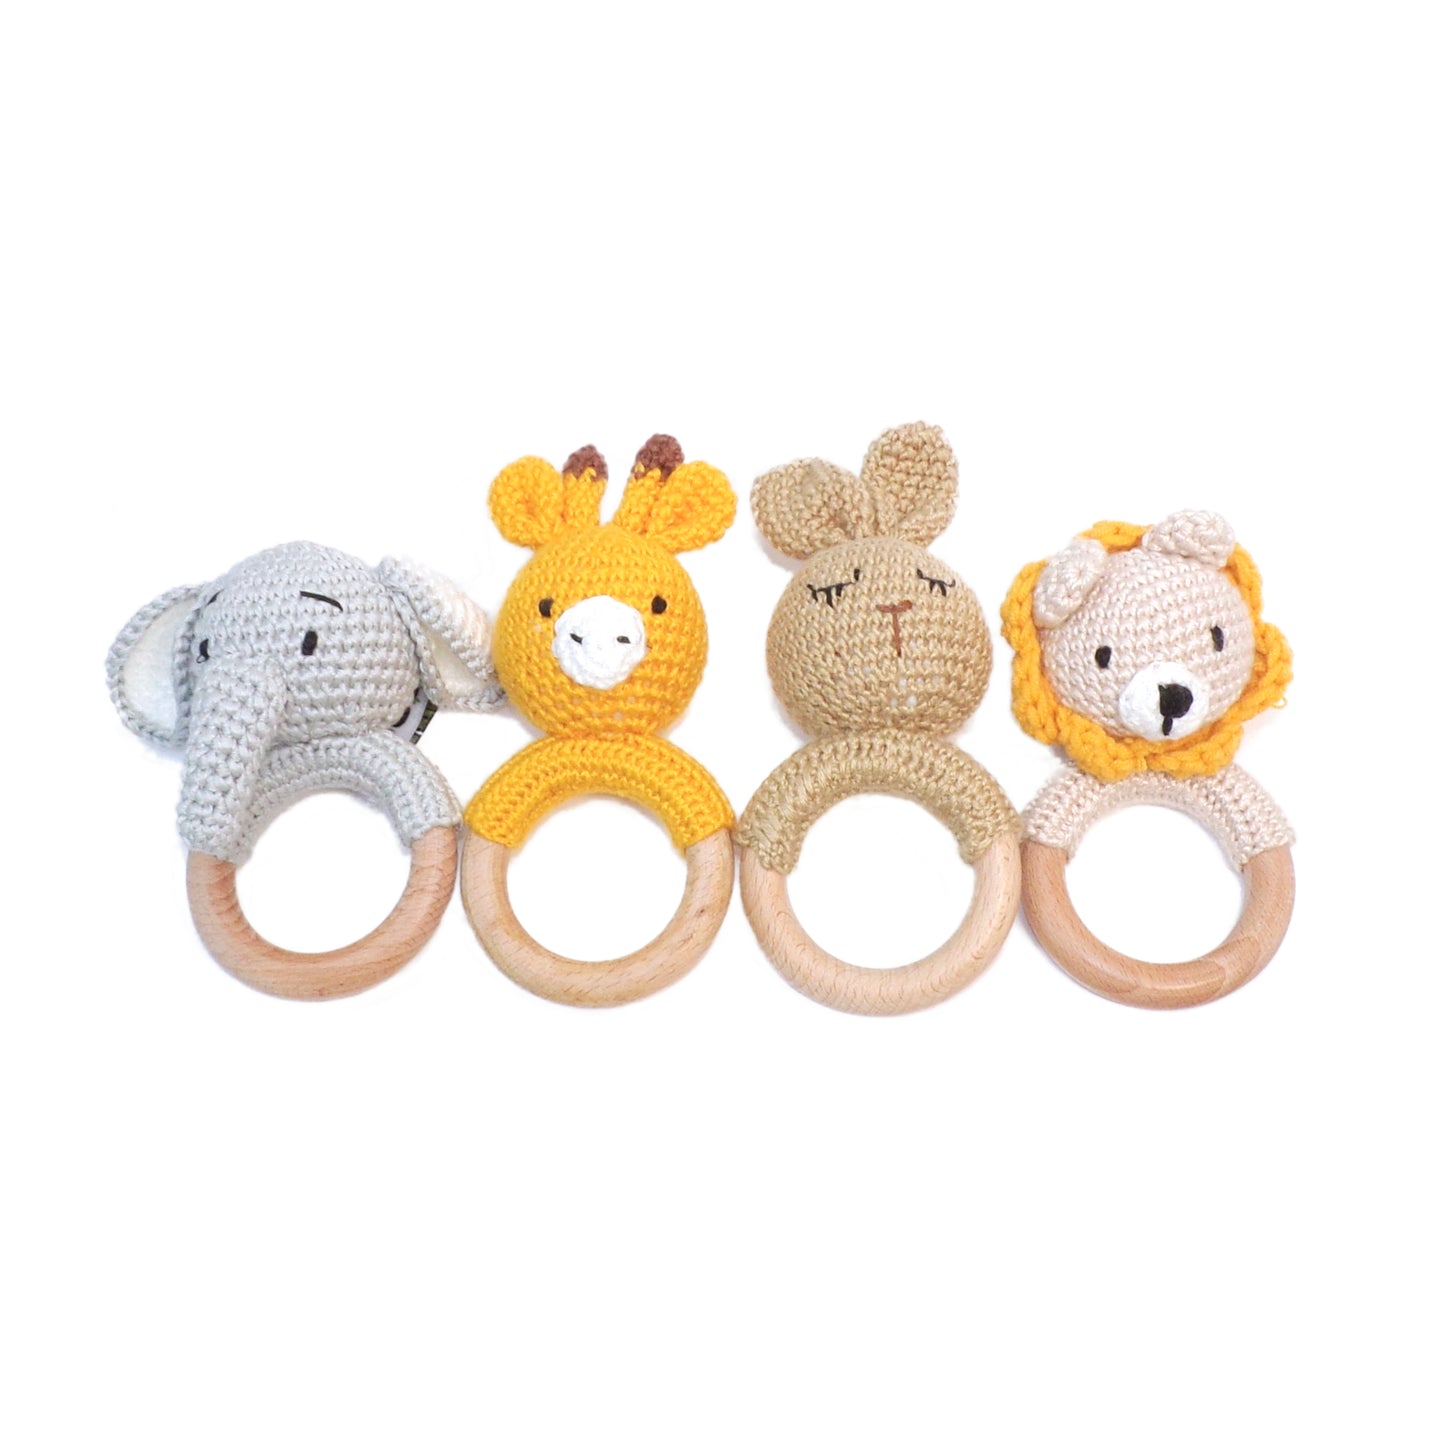 Baby rattles in rabbit, giraffe, elephant and lion designs, made from wool and bamboo.